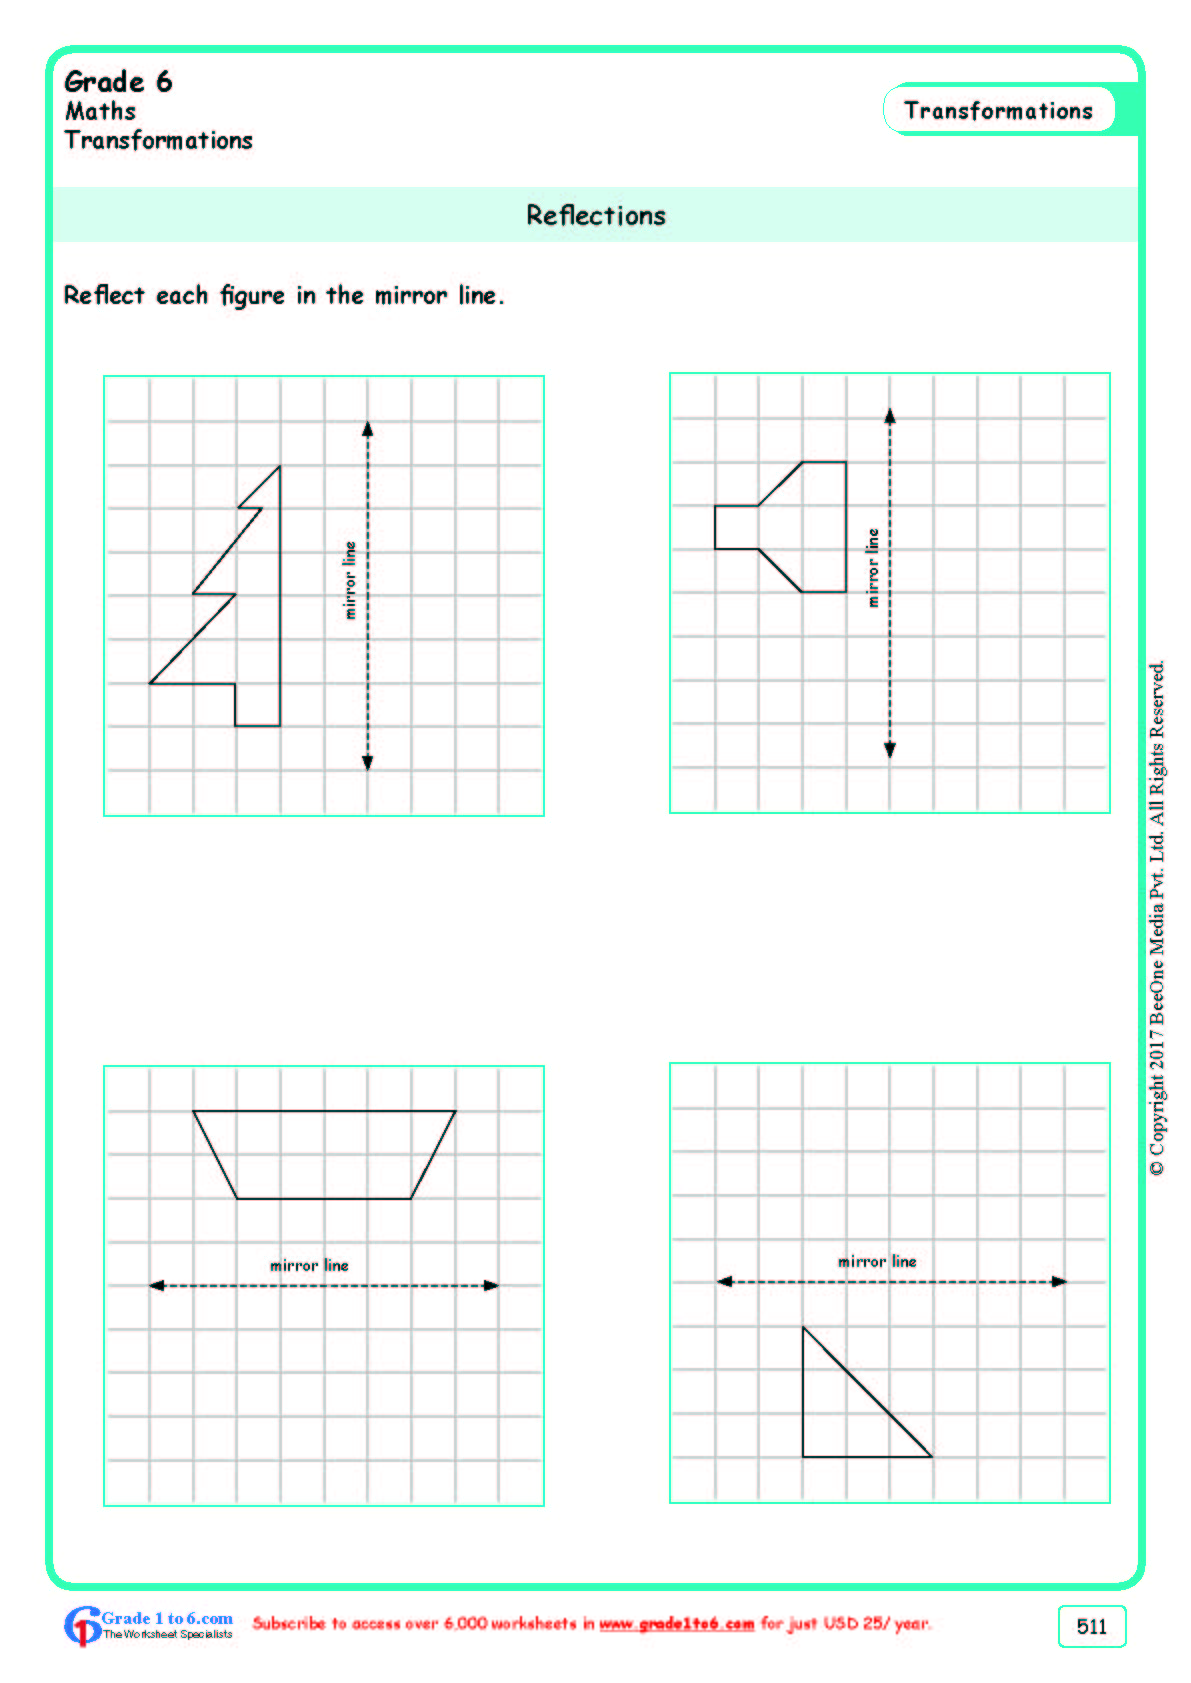 reflection-worksheets-www-grade1to6